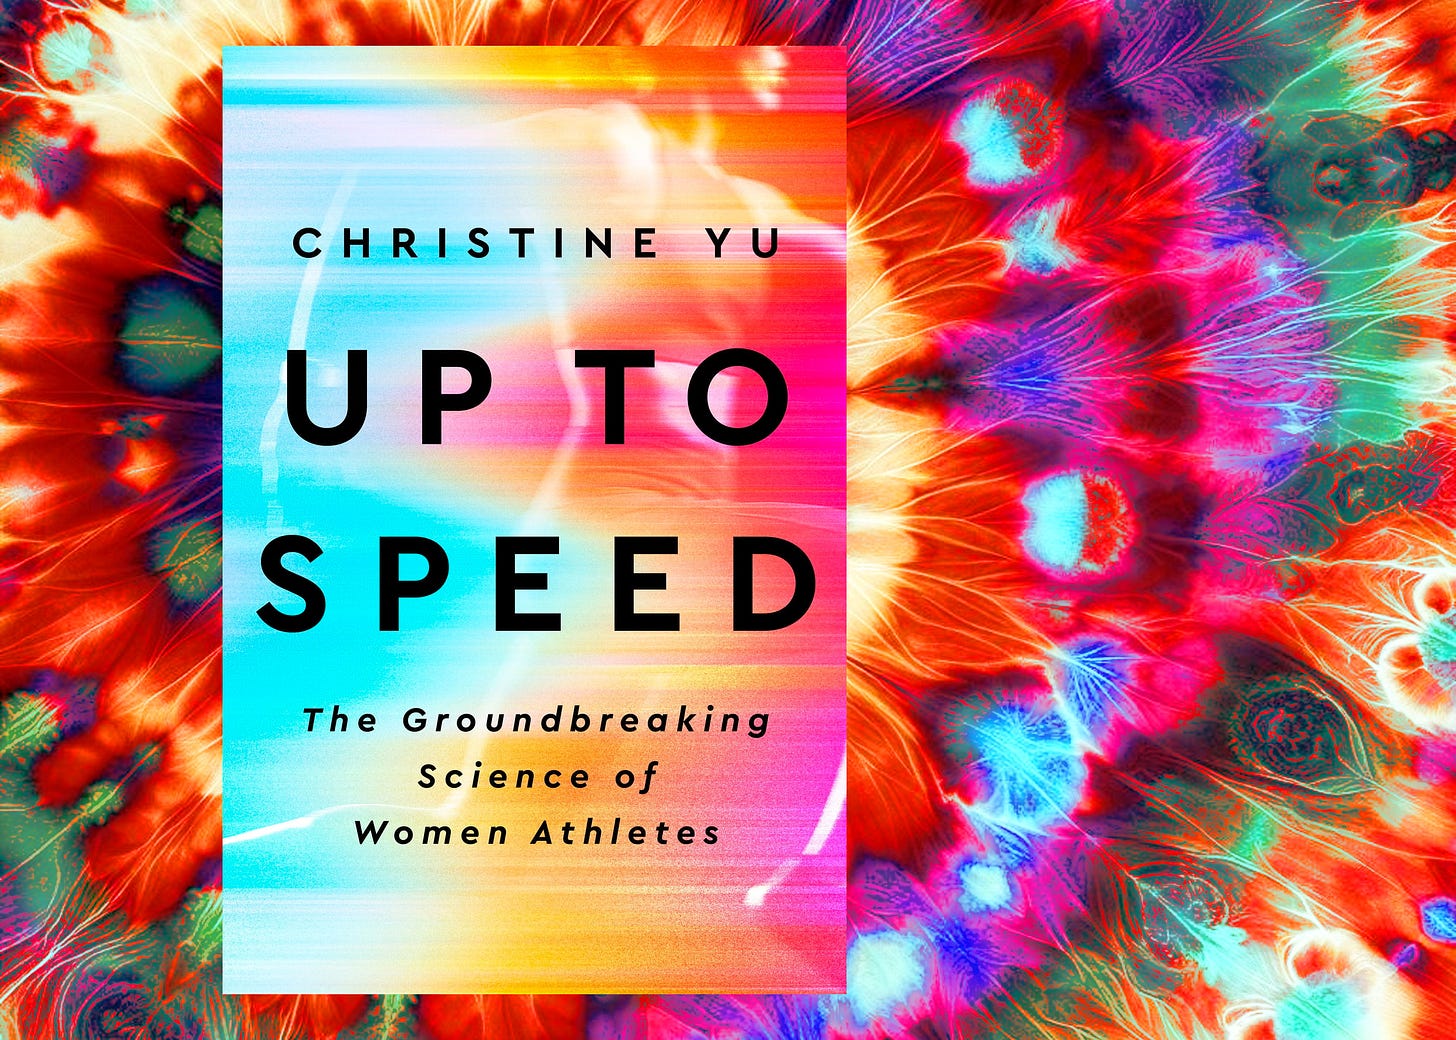 Up To Speed by Christine Yu on a tie-dye background